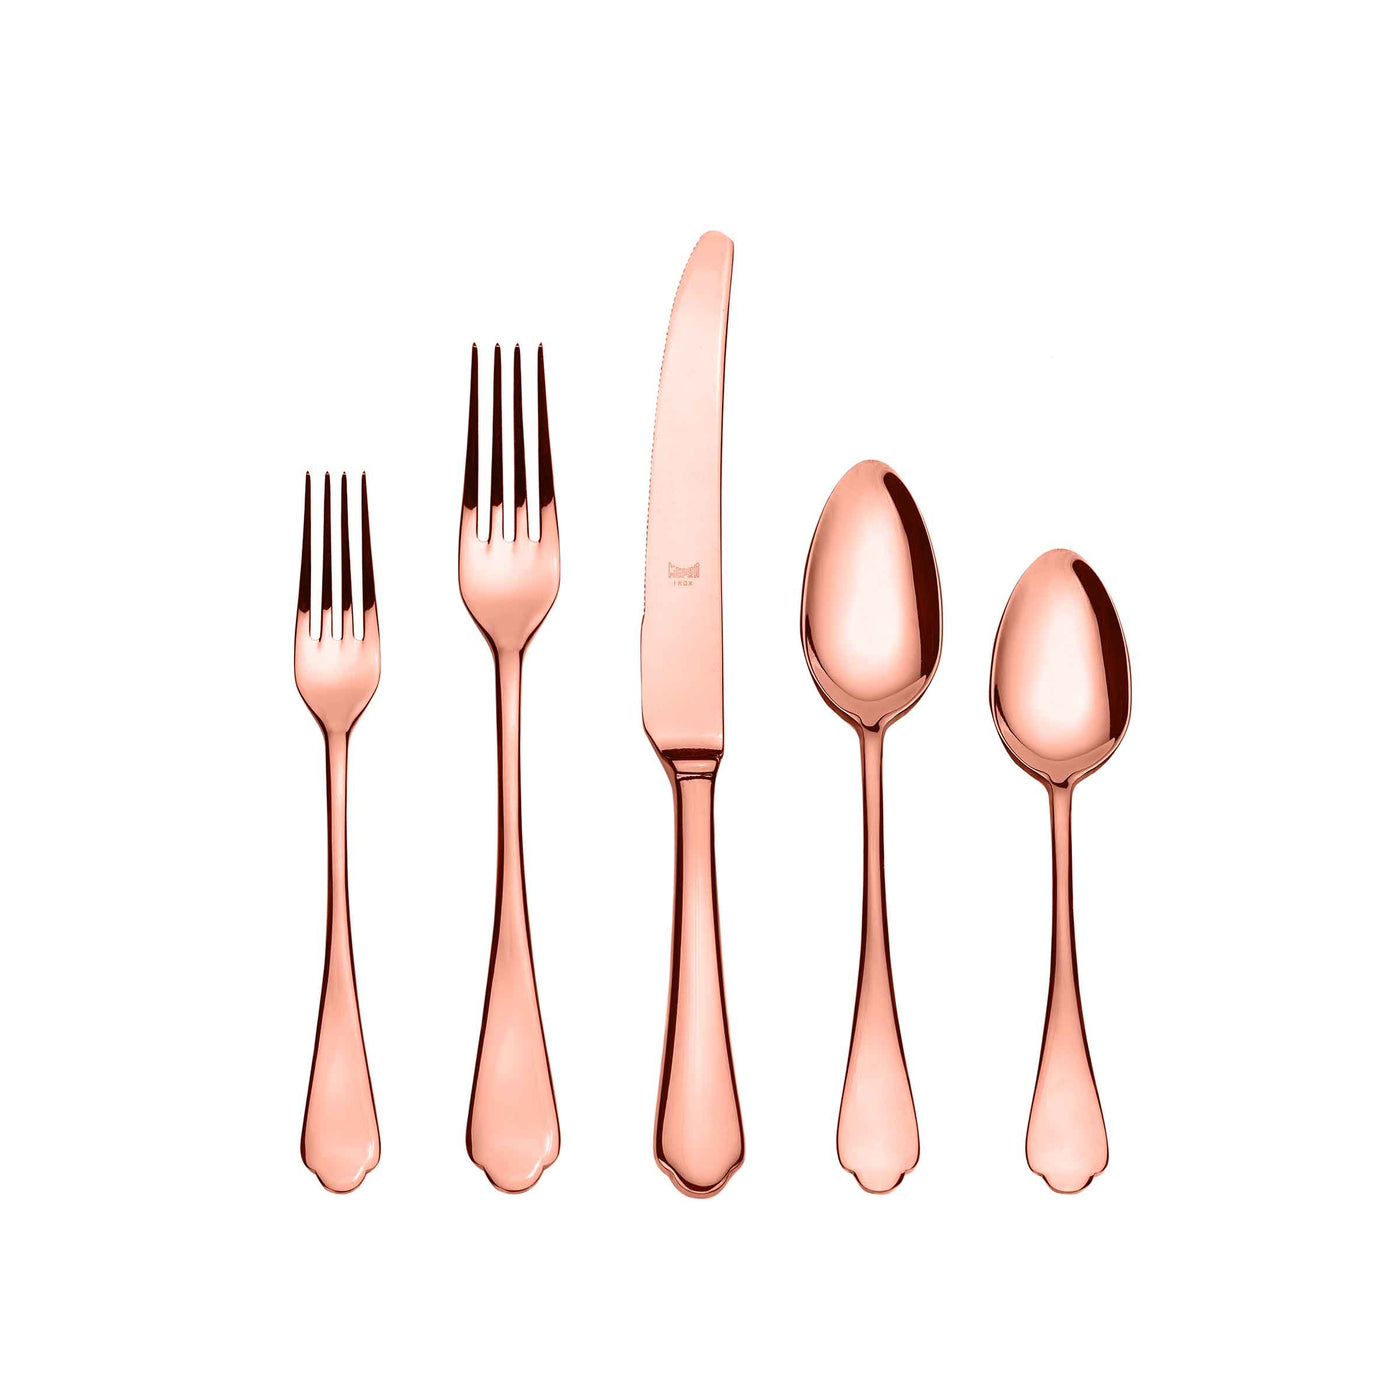 Stainless Steel Cutlery DOLCE VITA Set of Seventy-Five by Mepra 08